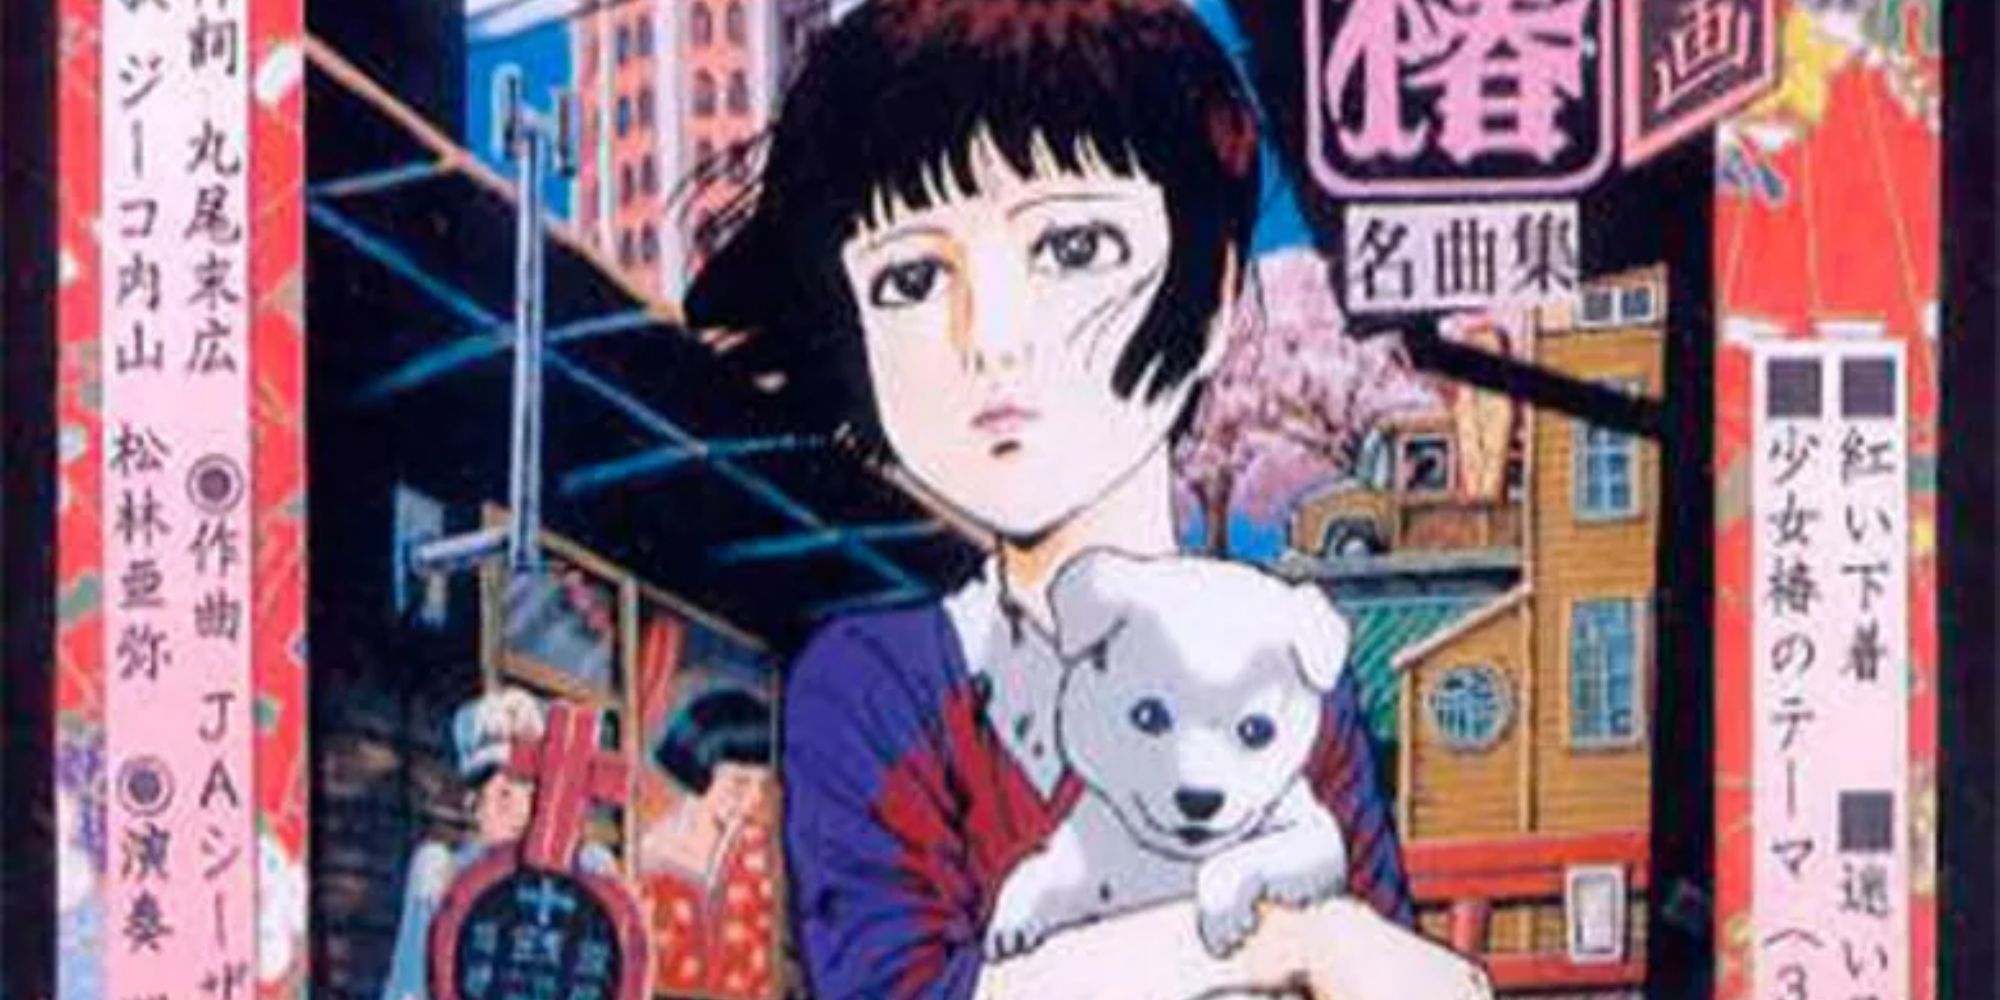 Midori holding a puppy in the streets of Tokyo in Midori